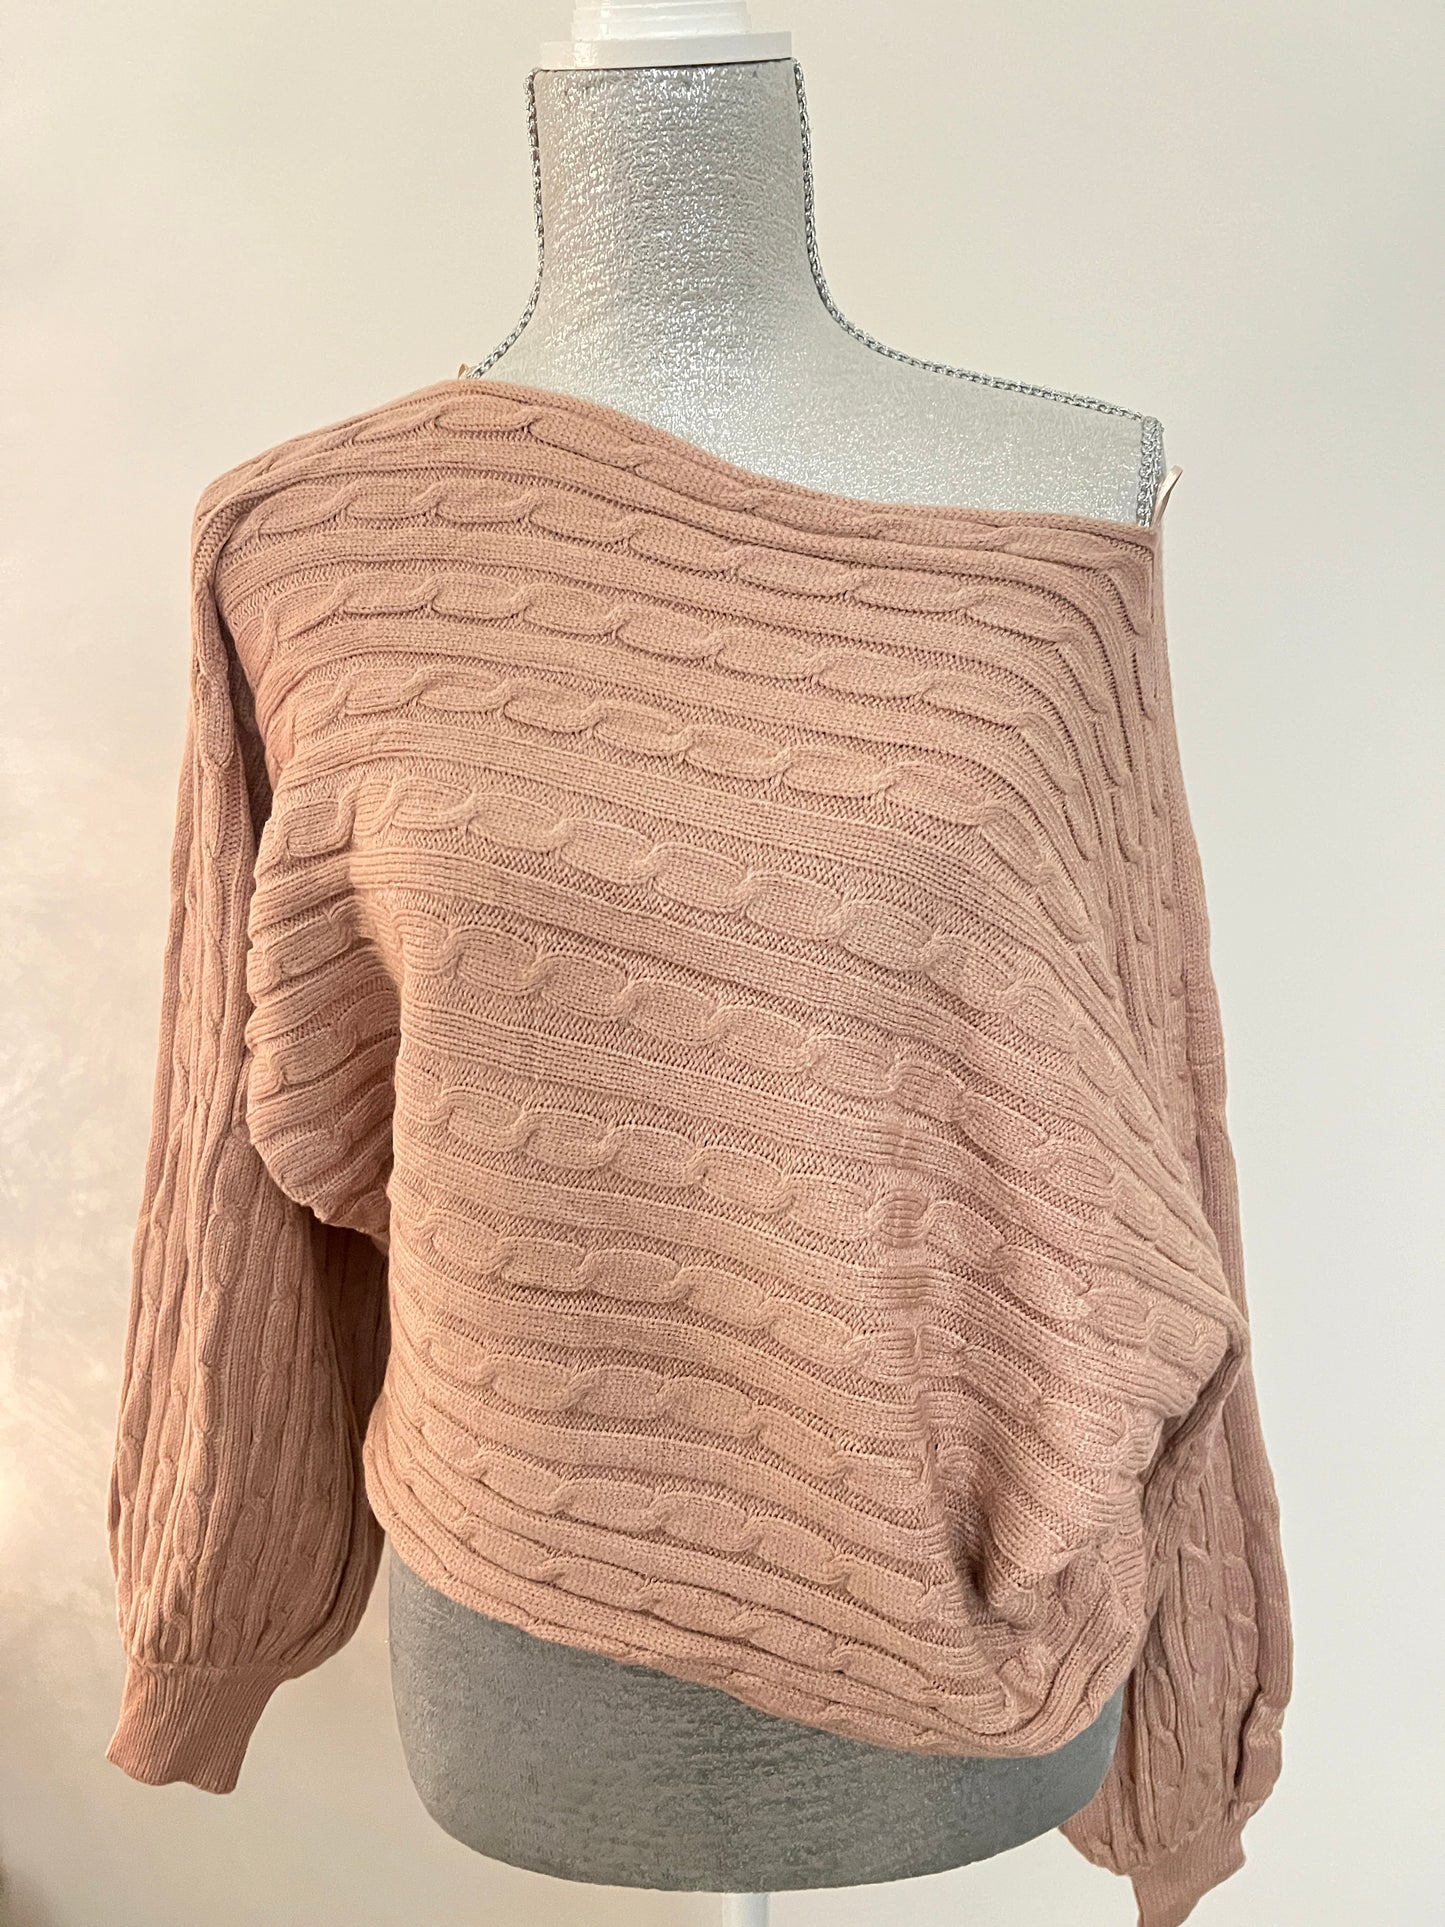 Braided Cable Knit Sweater